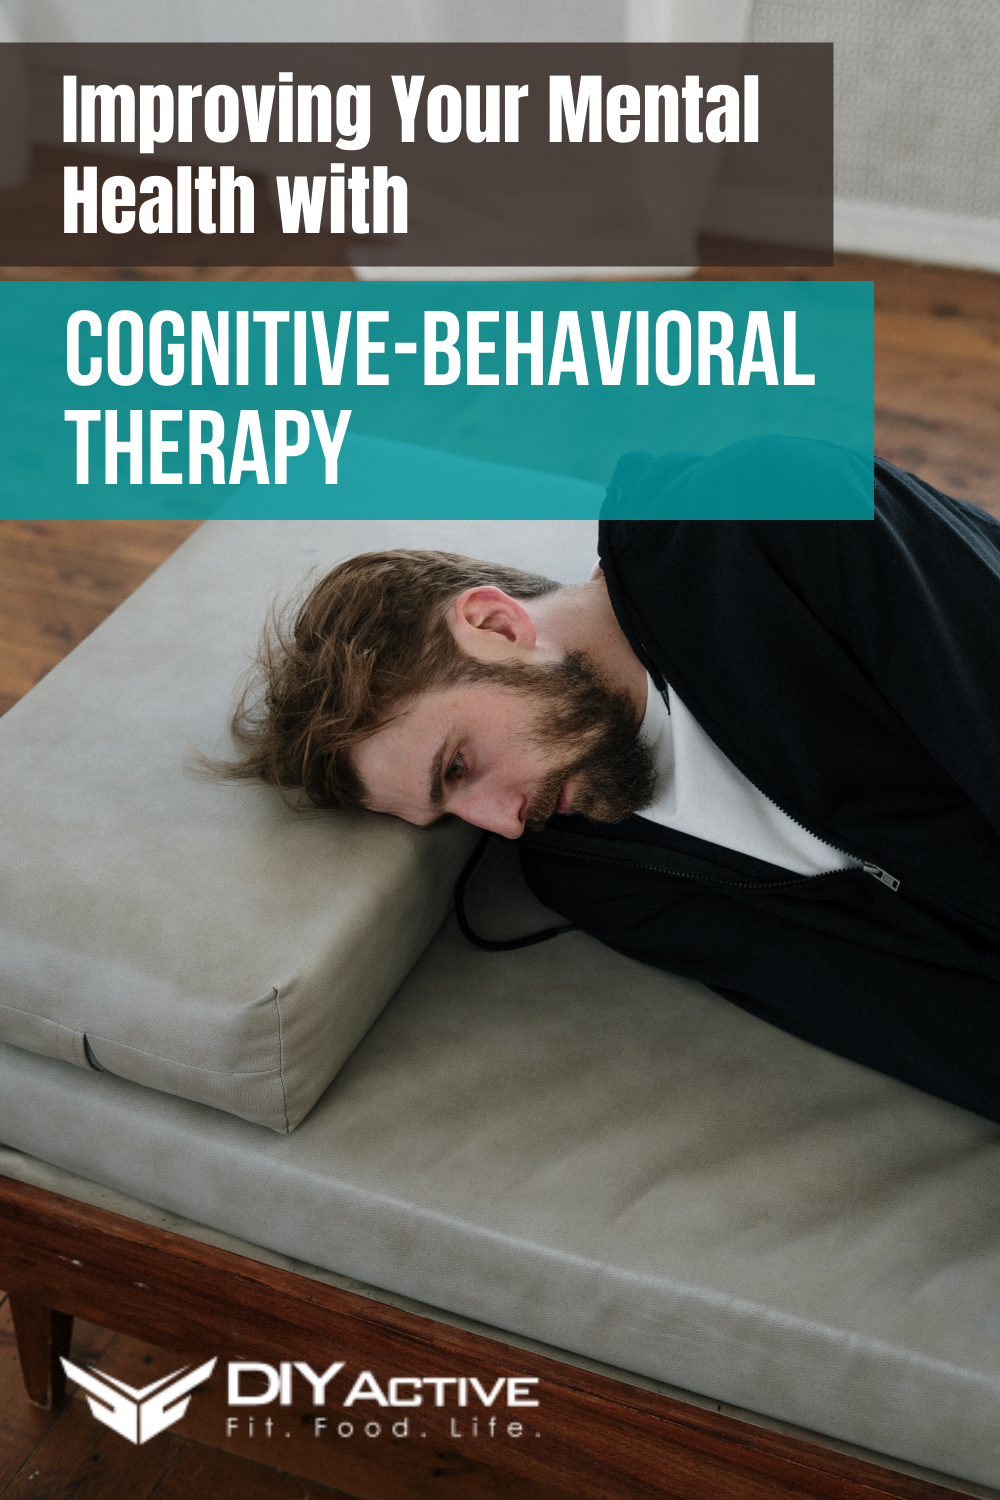 Improving Your Mental Health with Cognitive-Behavioral Therapy